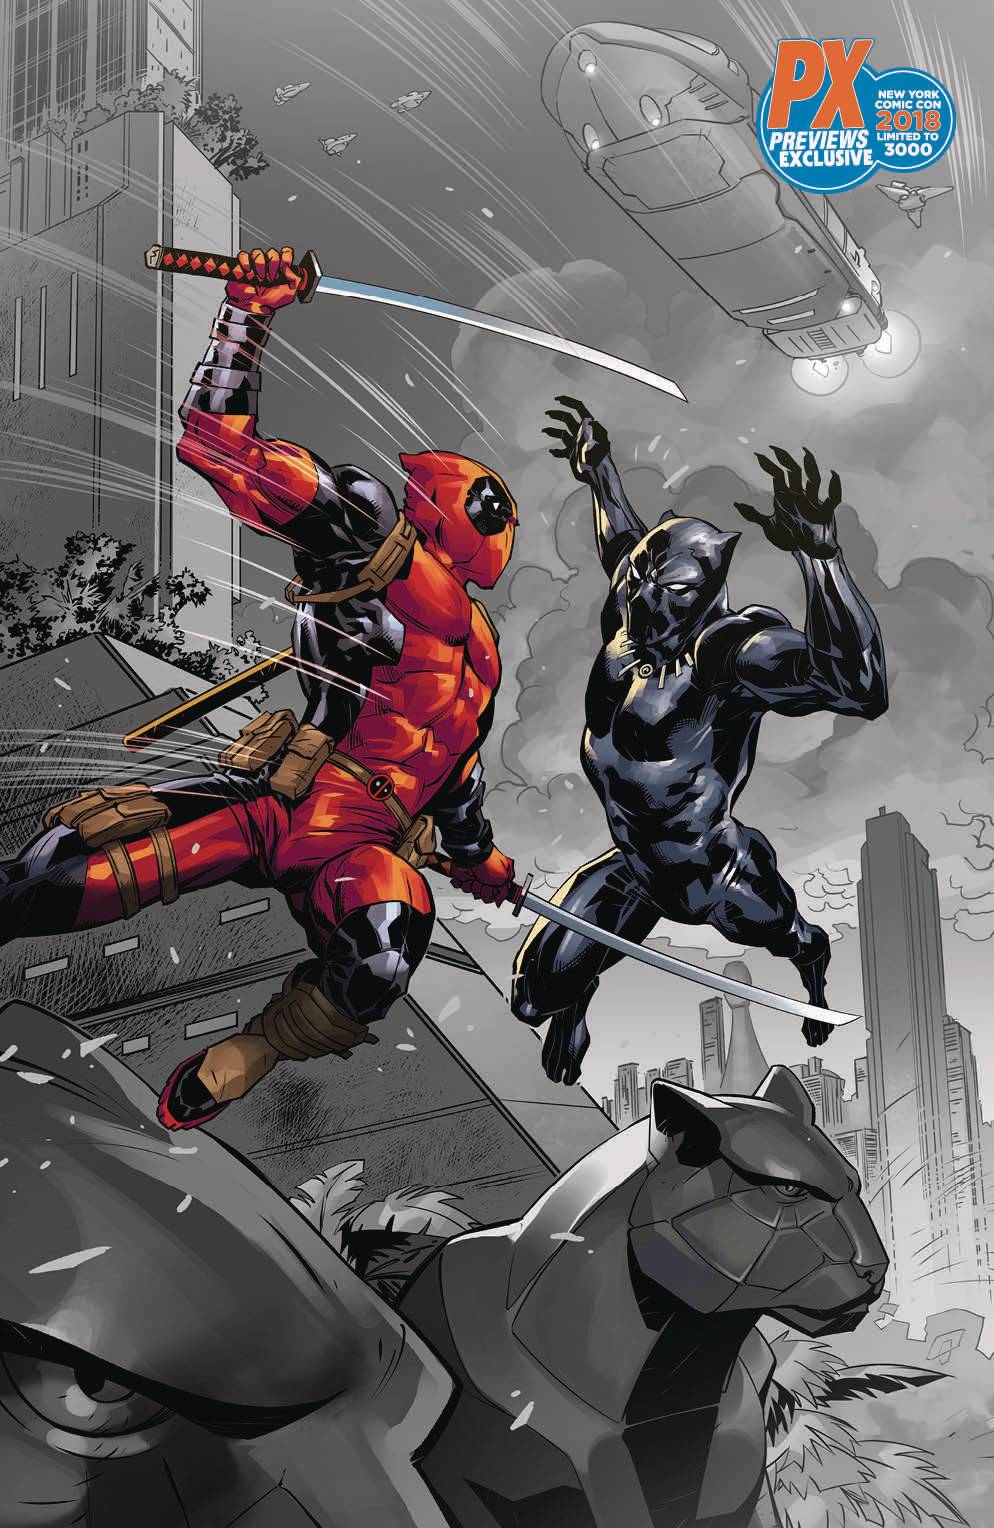 BLACK PANTHER VS DEADPOOL #1 PX EXCLUSIVE NYCC VARIANT 2018